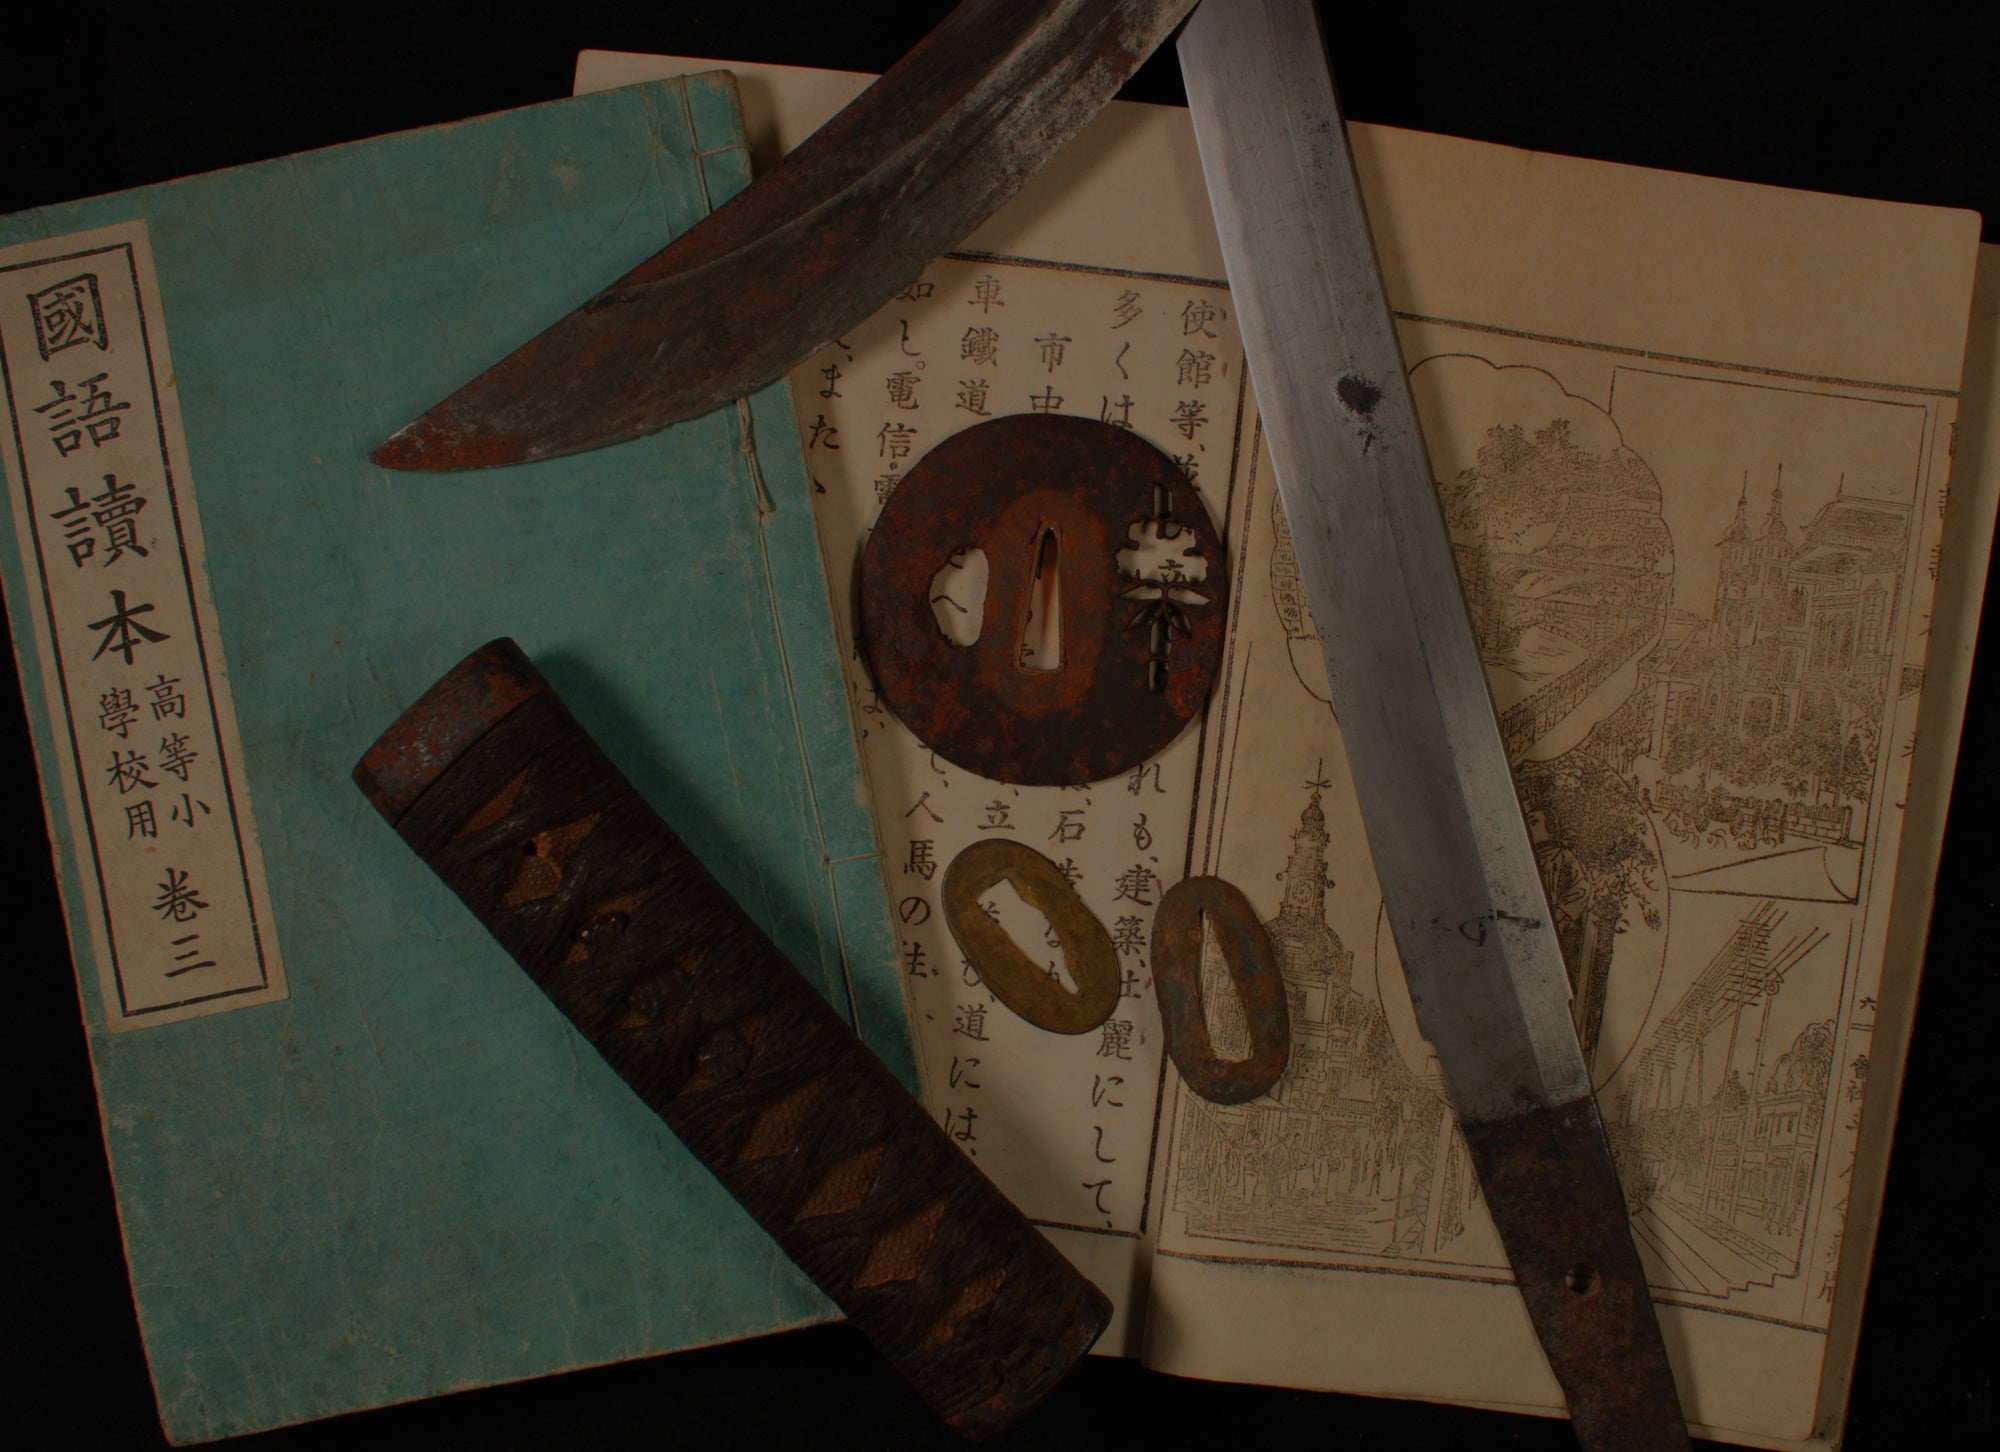 February 22nd Special Offer: Books & Swords of Japan